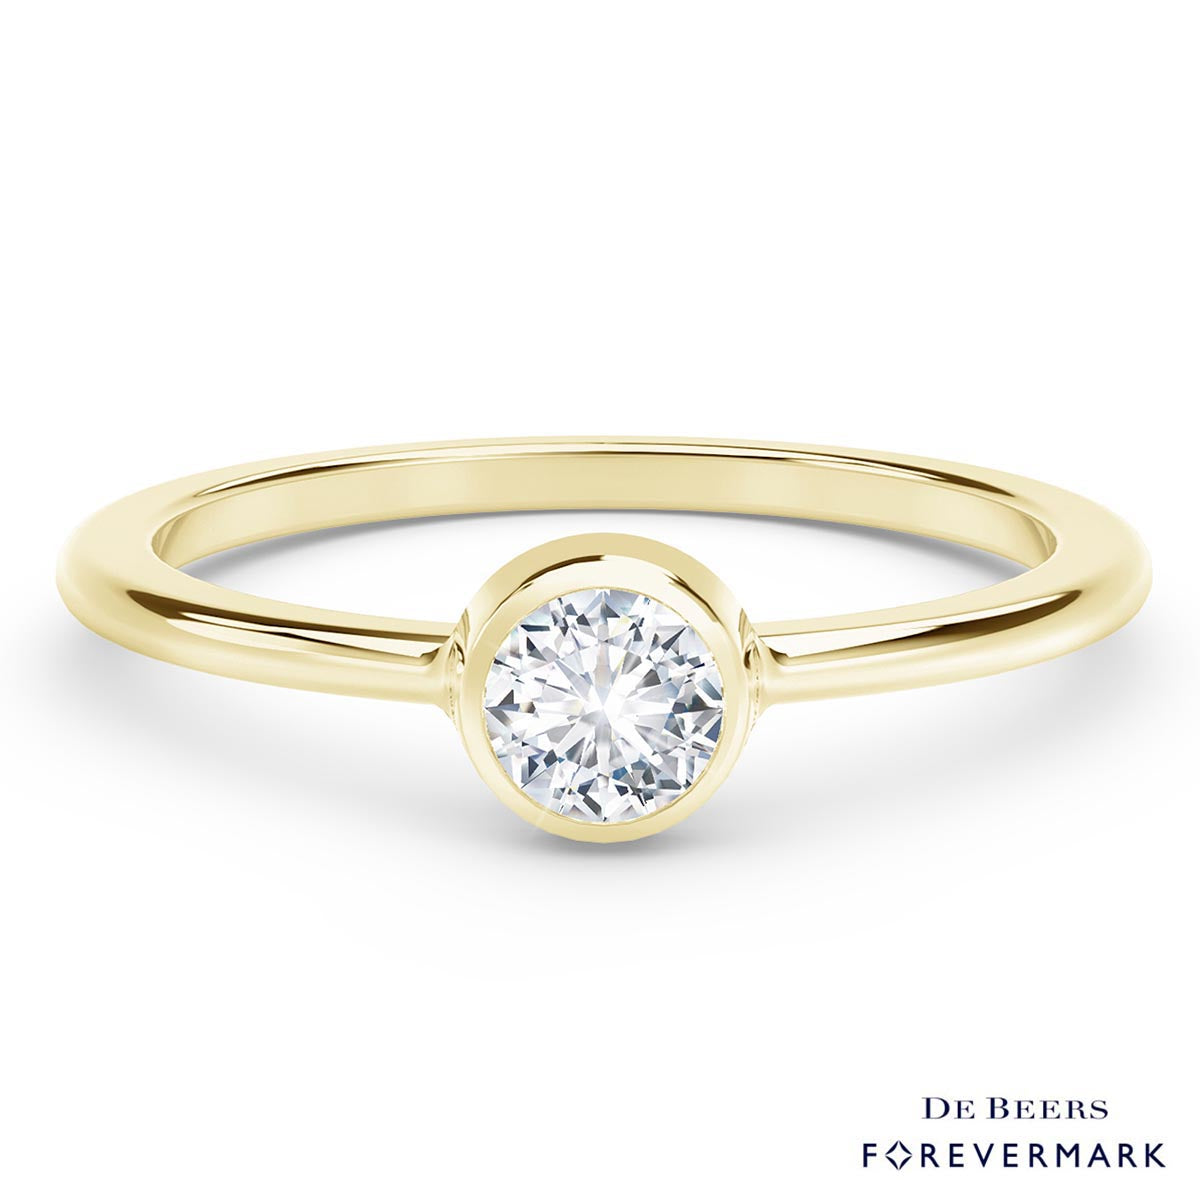 De Beers Forevermark Tribute Collection Classic Bezel Stackable Ring in 18kt Yellow Gold (1/4ct)